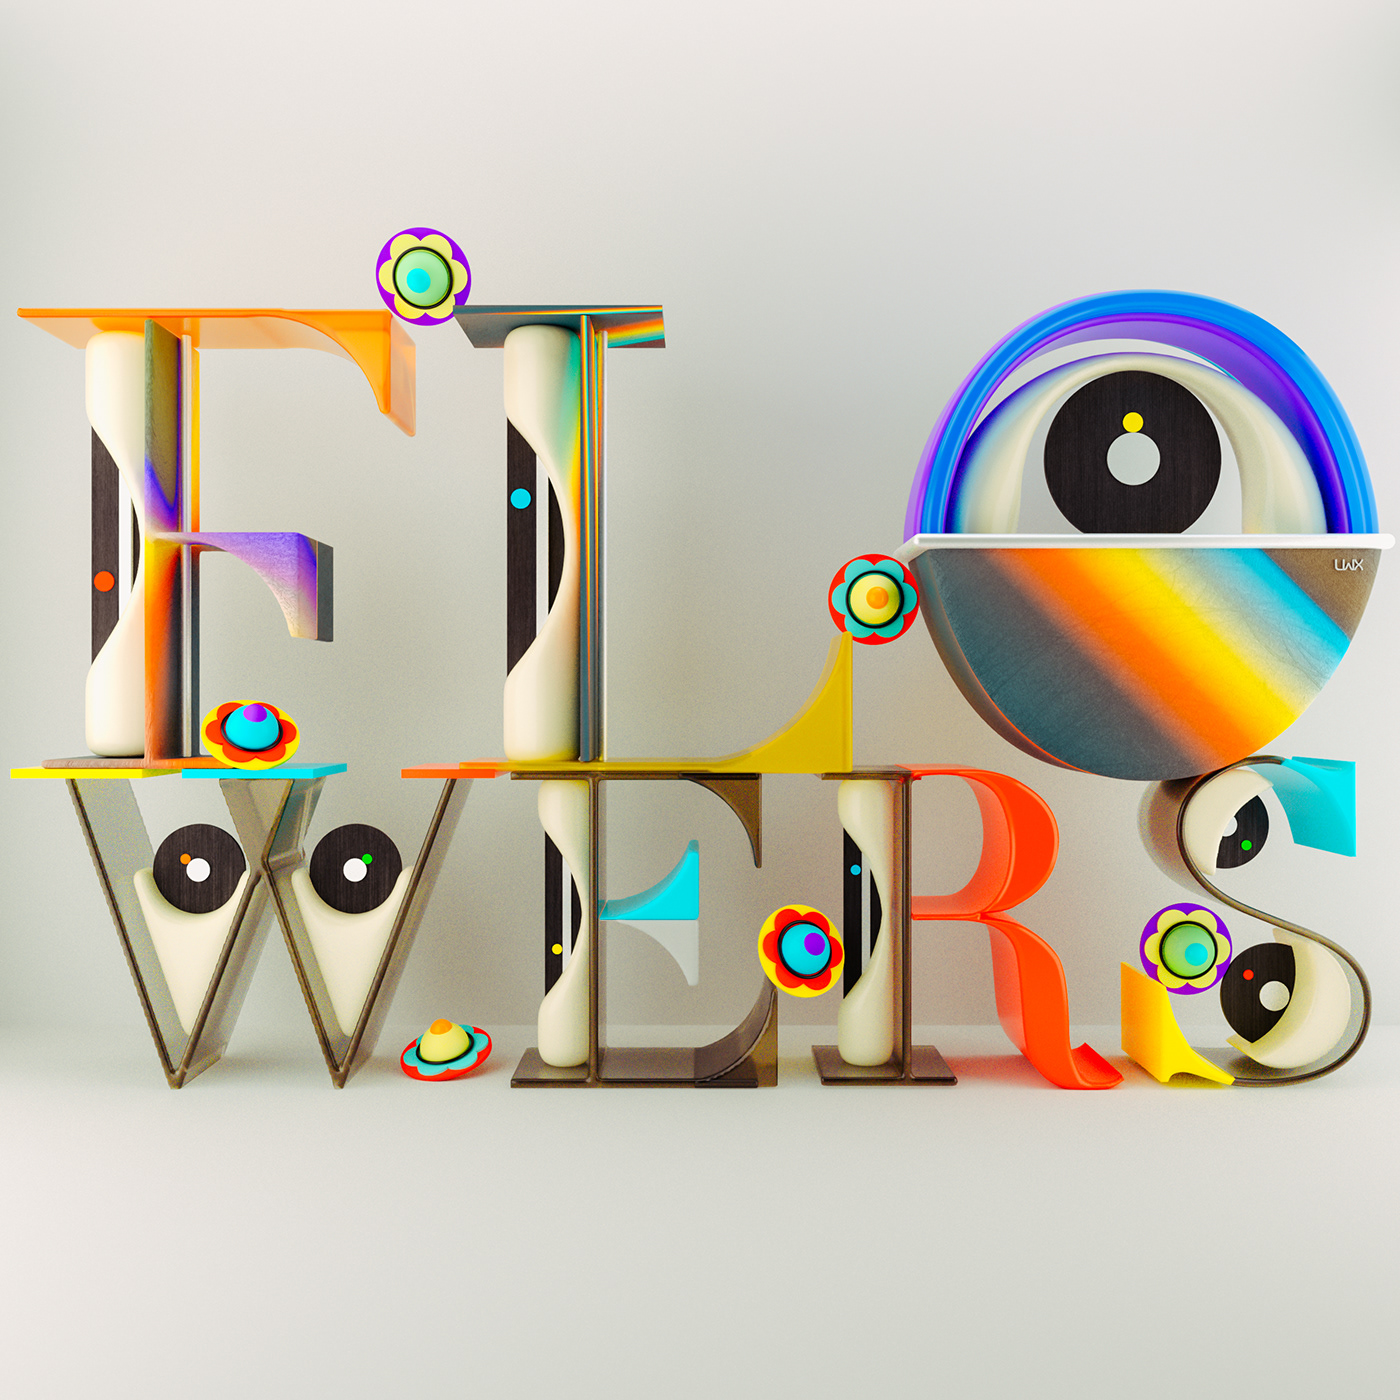 3d design 3Dillustration 3DType Abstract Art colorful happy lettering Modern Design textures vibrant